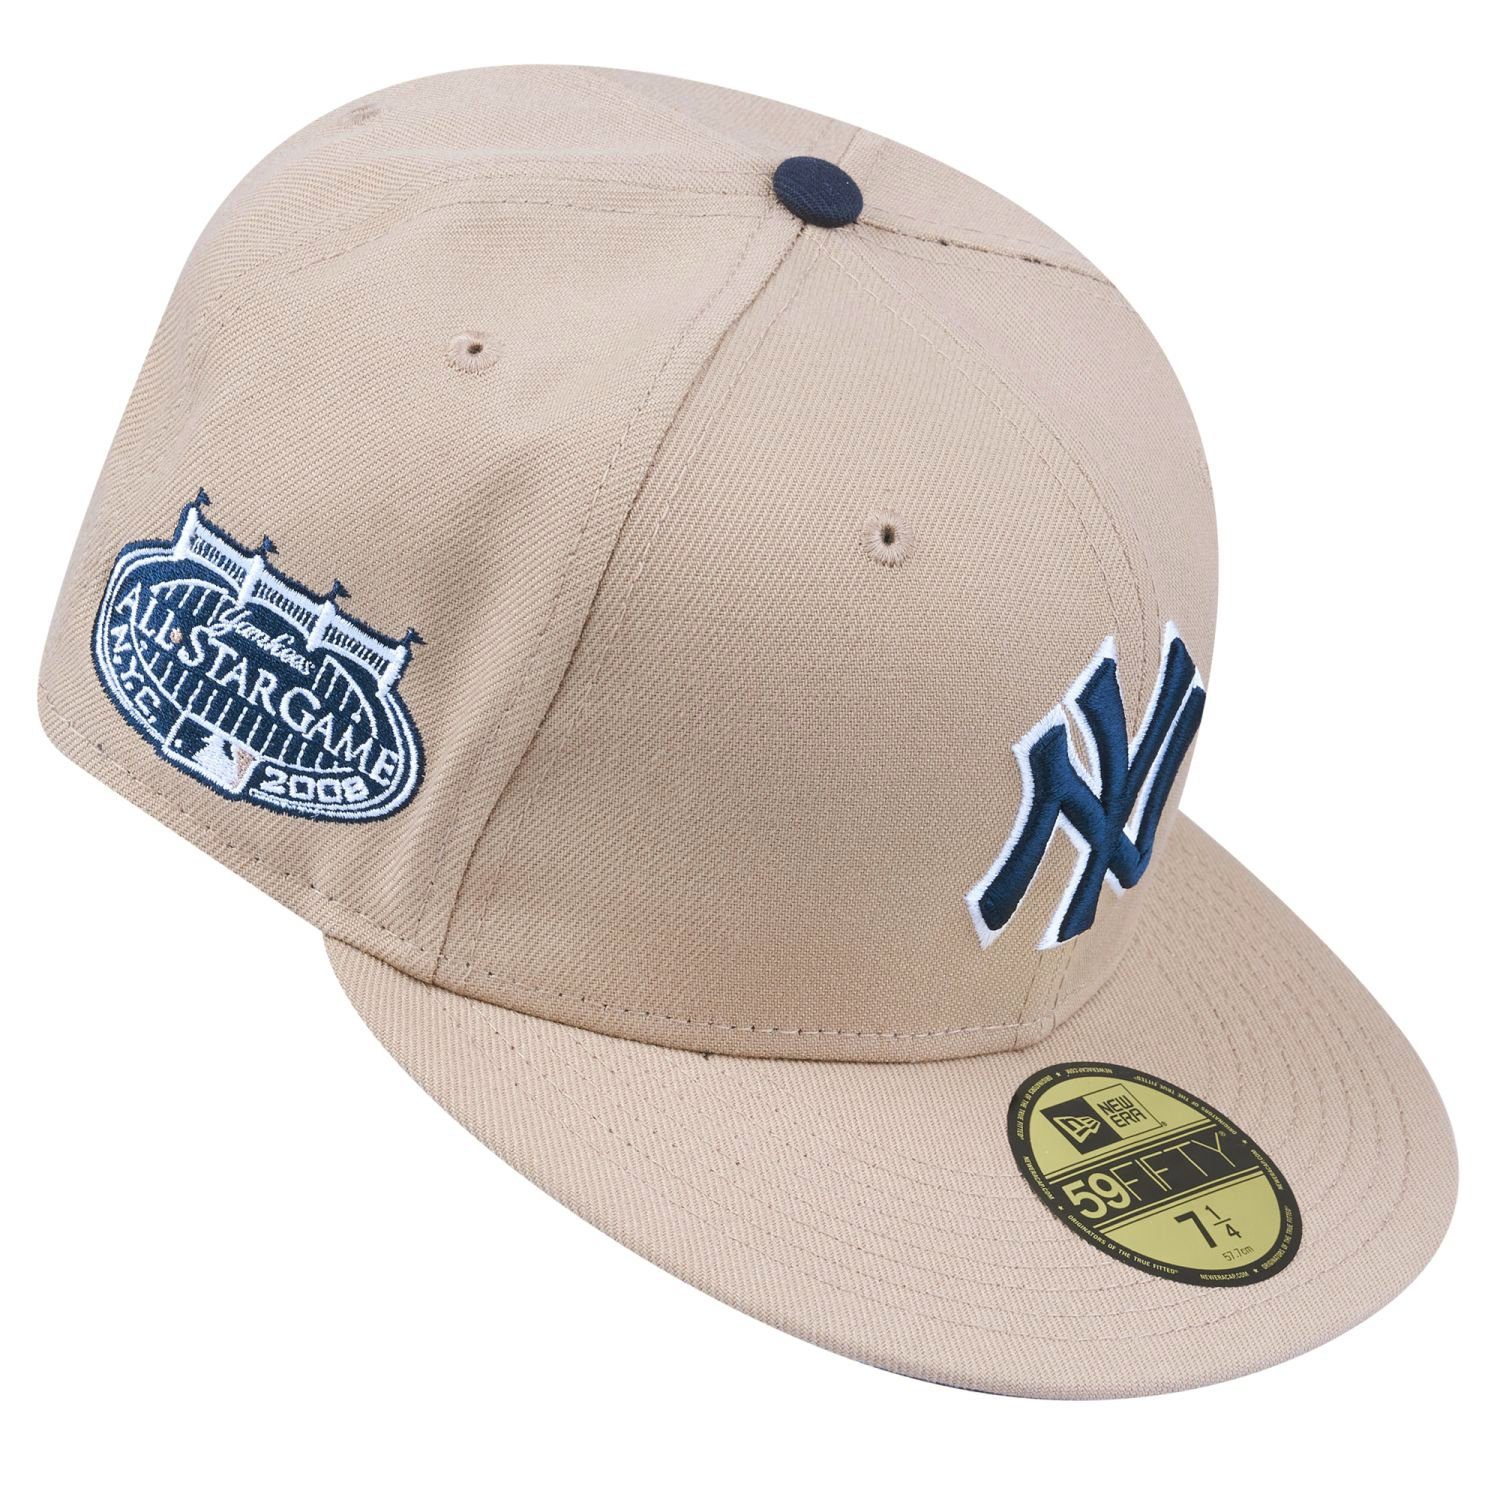 New Era 59Fifty Fitted York Yankees Cap COOPERSTOWN New